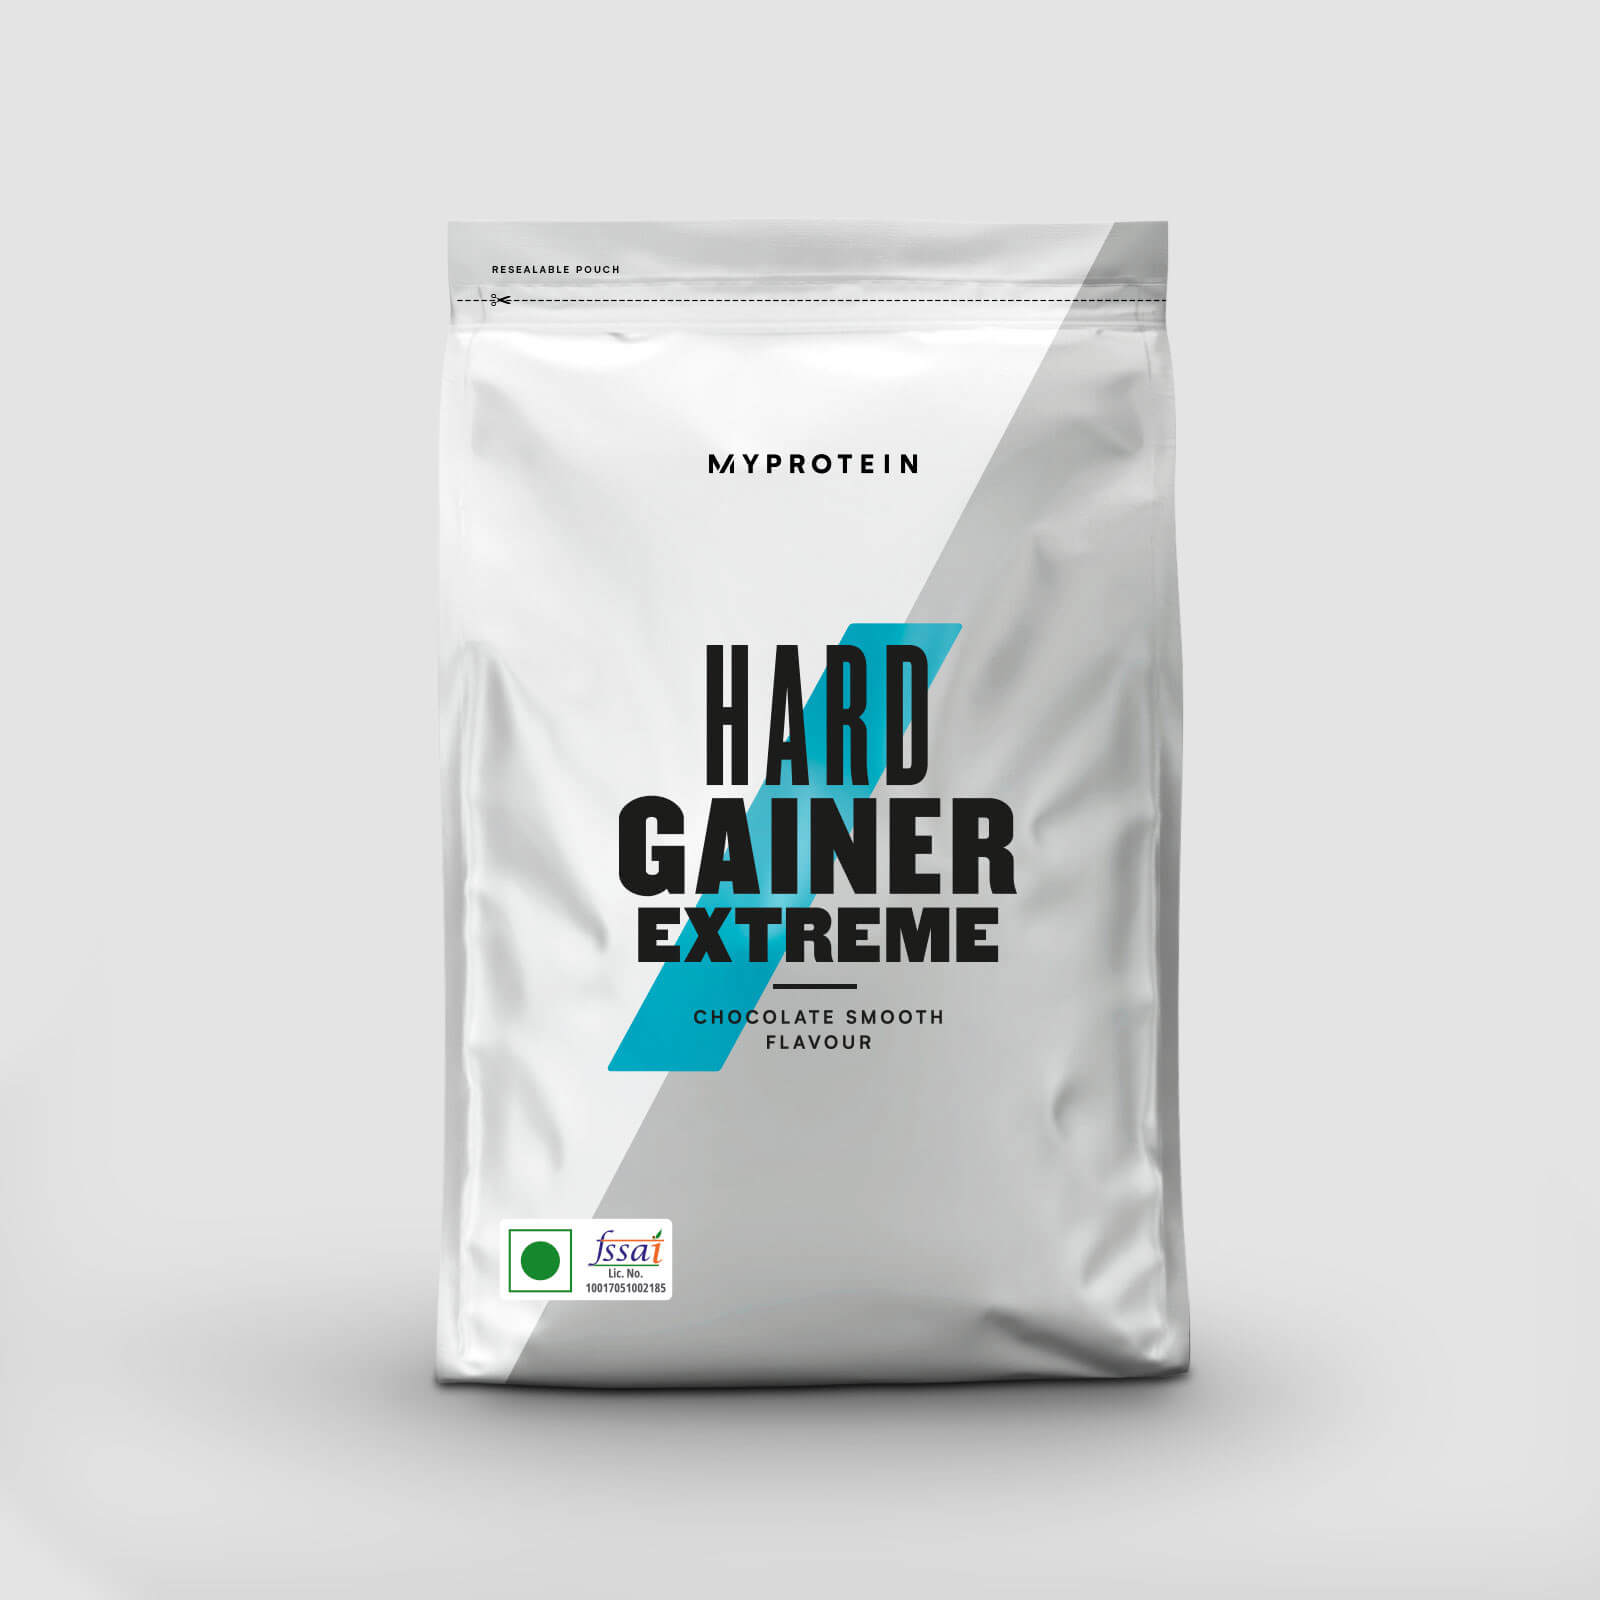 Hard Gainer Extreme - 2.5kg - Chocolate Smooth